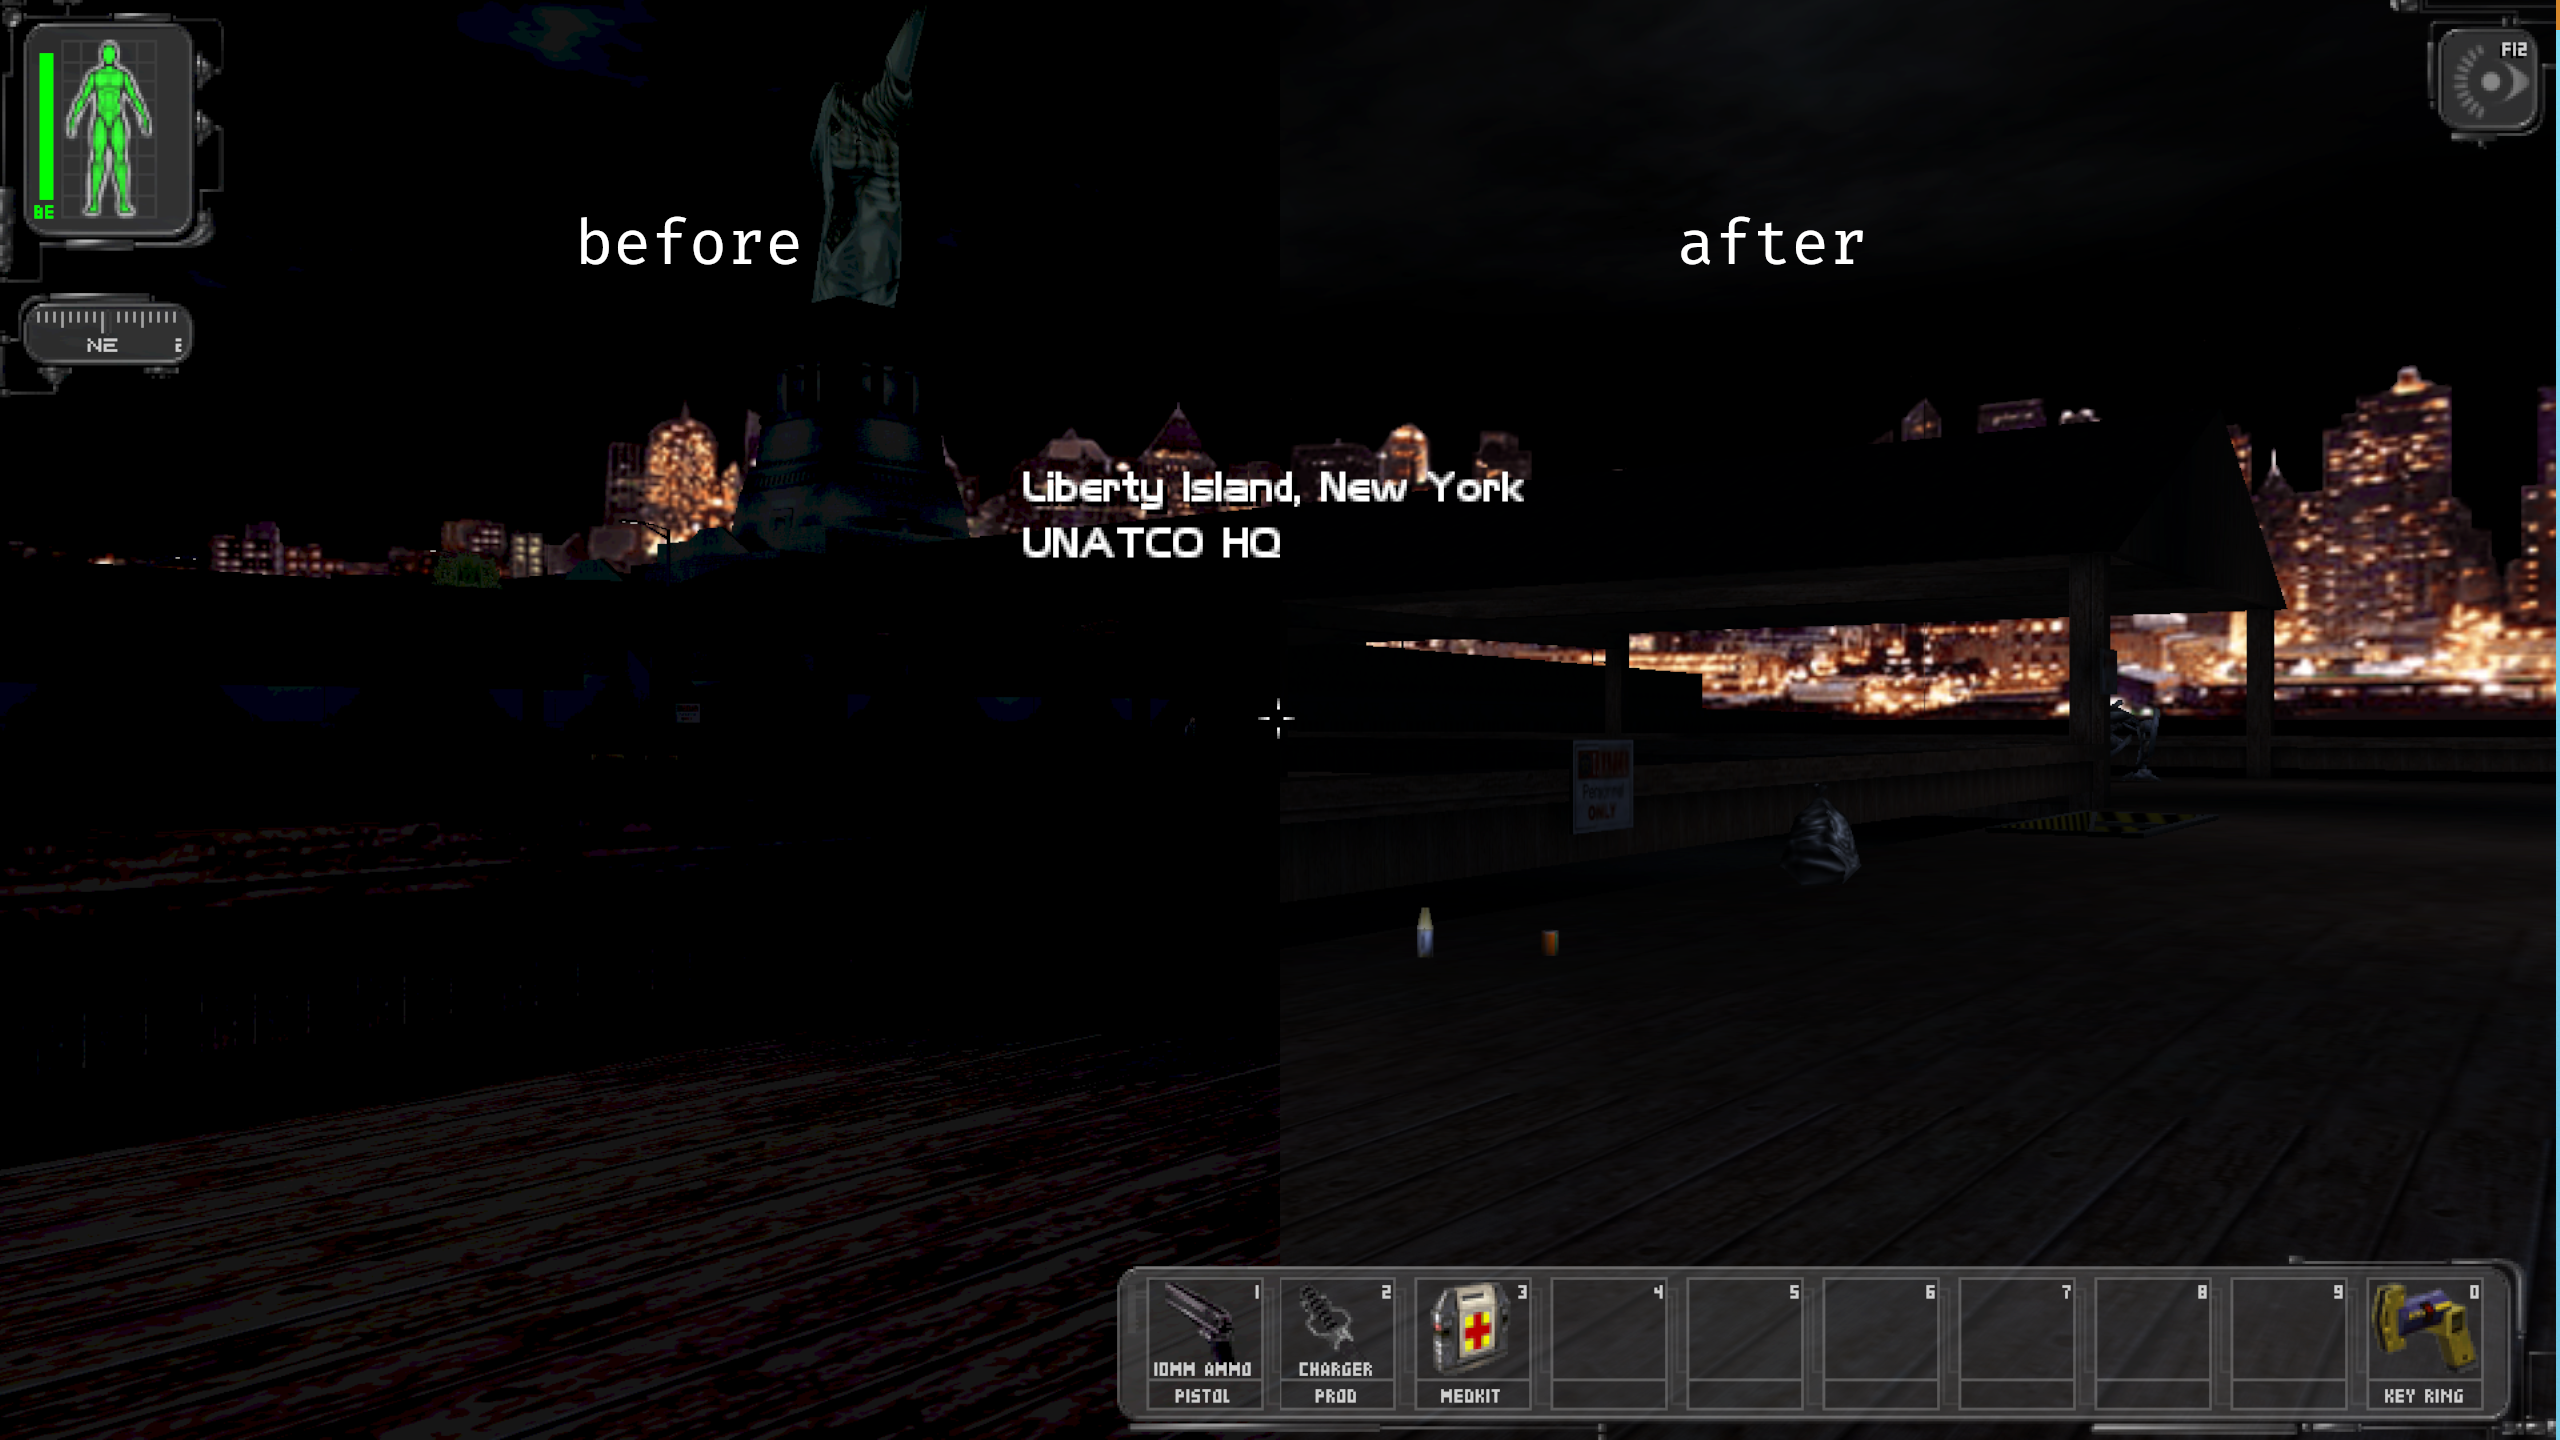 A game screenshot displaying the Statue of Liberty in front of a cityscape. Closer to the player are wooden docks. The image is split down the middle, left side says before and is very dark, the right side says after and is much lighter.